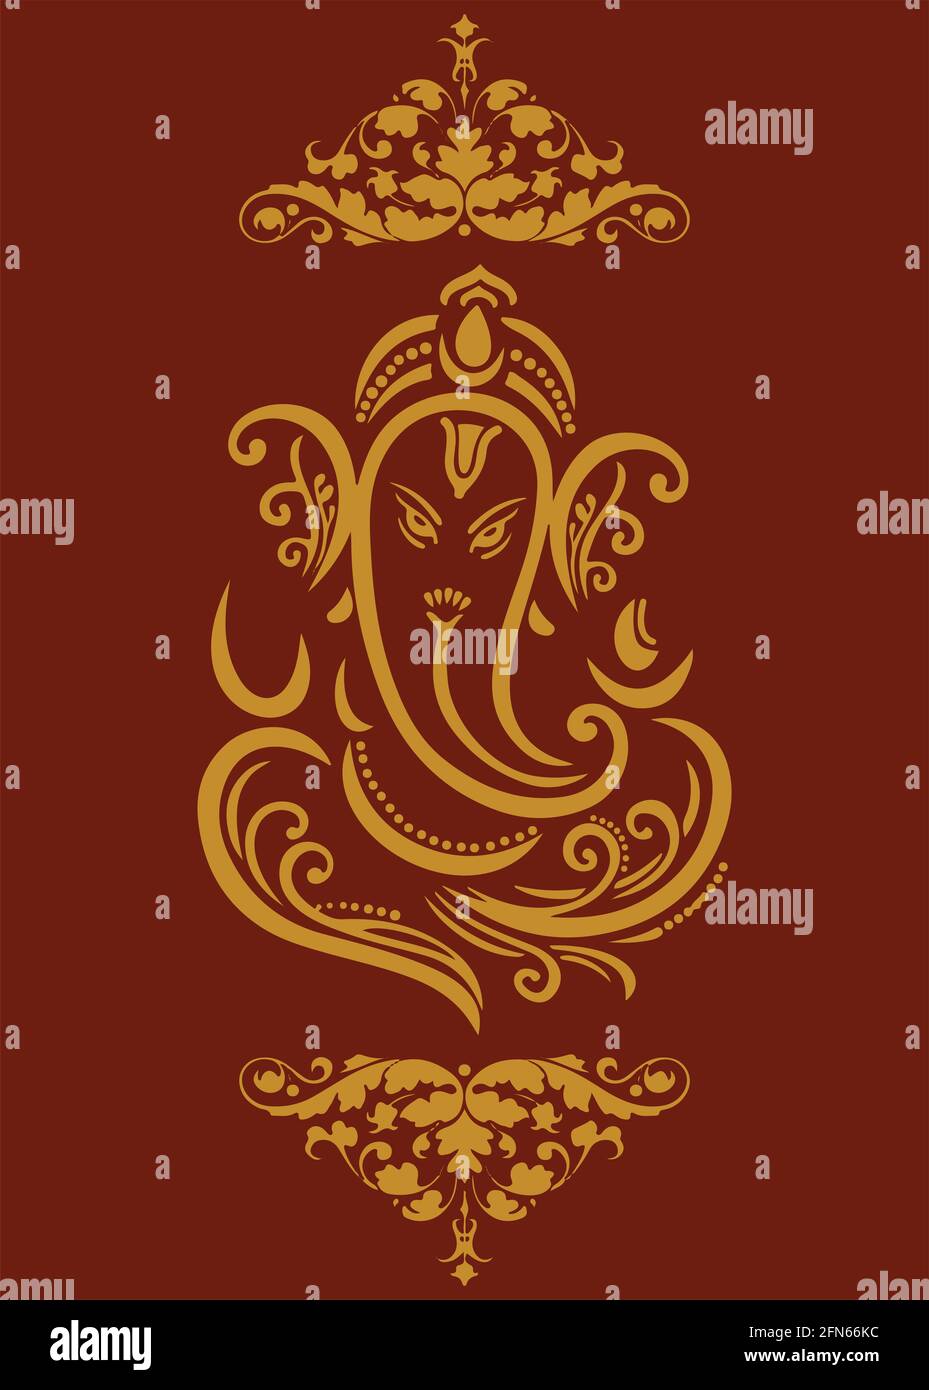 Illustration of a sketch of Lord Ganesha silhouette on a brown ...